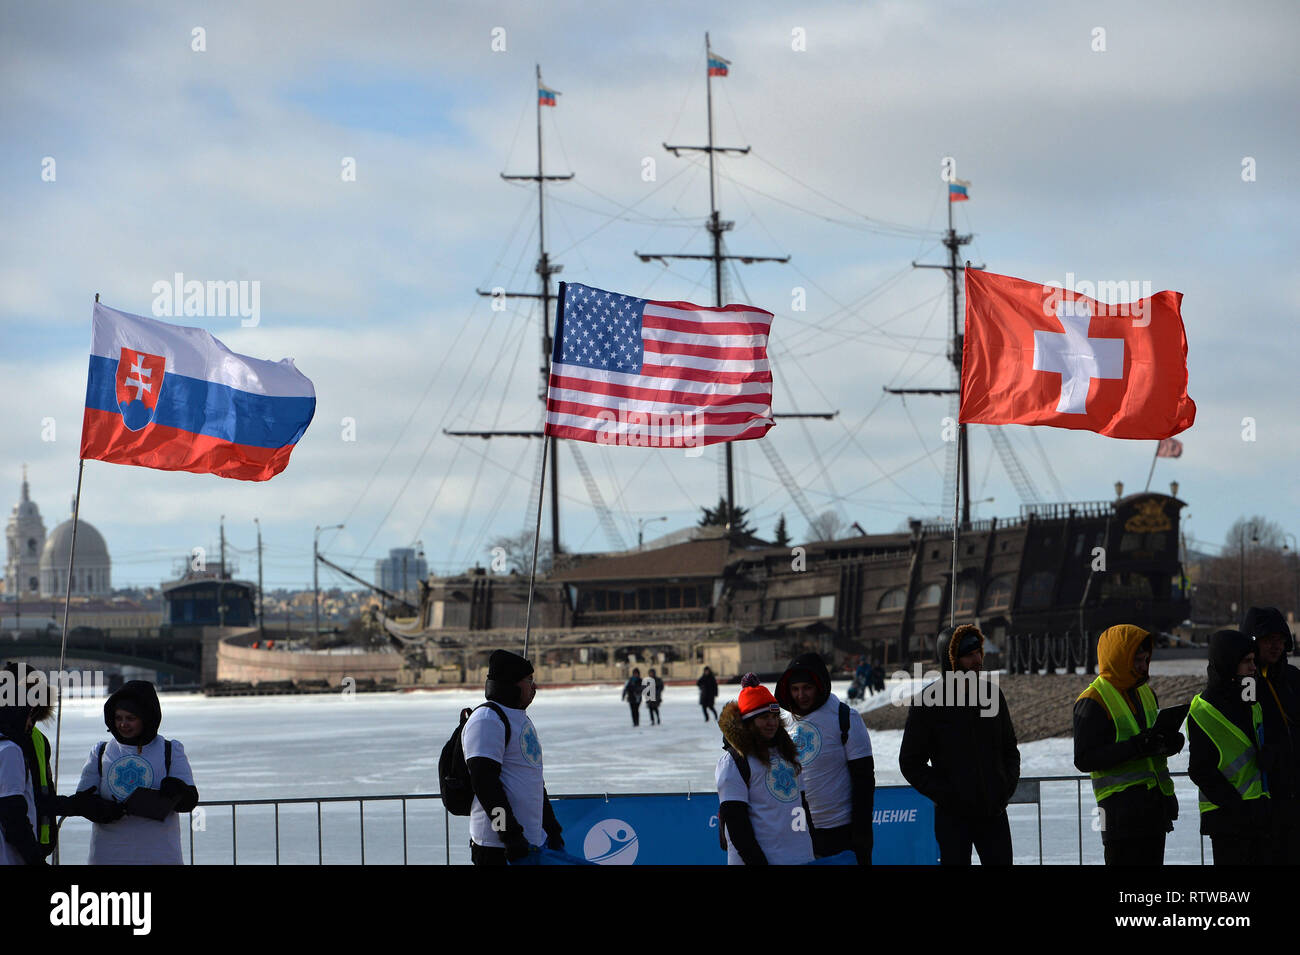 St. Petersburg, Russia. 2nd March 2019. took place at the Trubetskoy  bastion of the Peter and Paul Fortress, in the basin cut down in the ice of  the Neva River. In competitions,